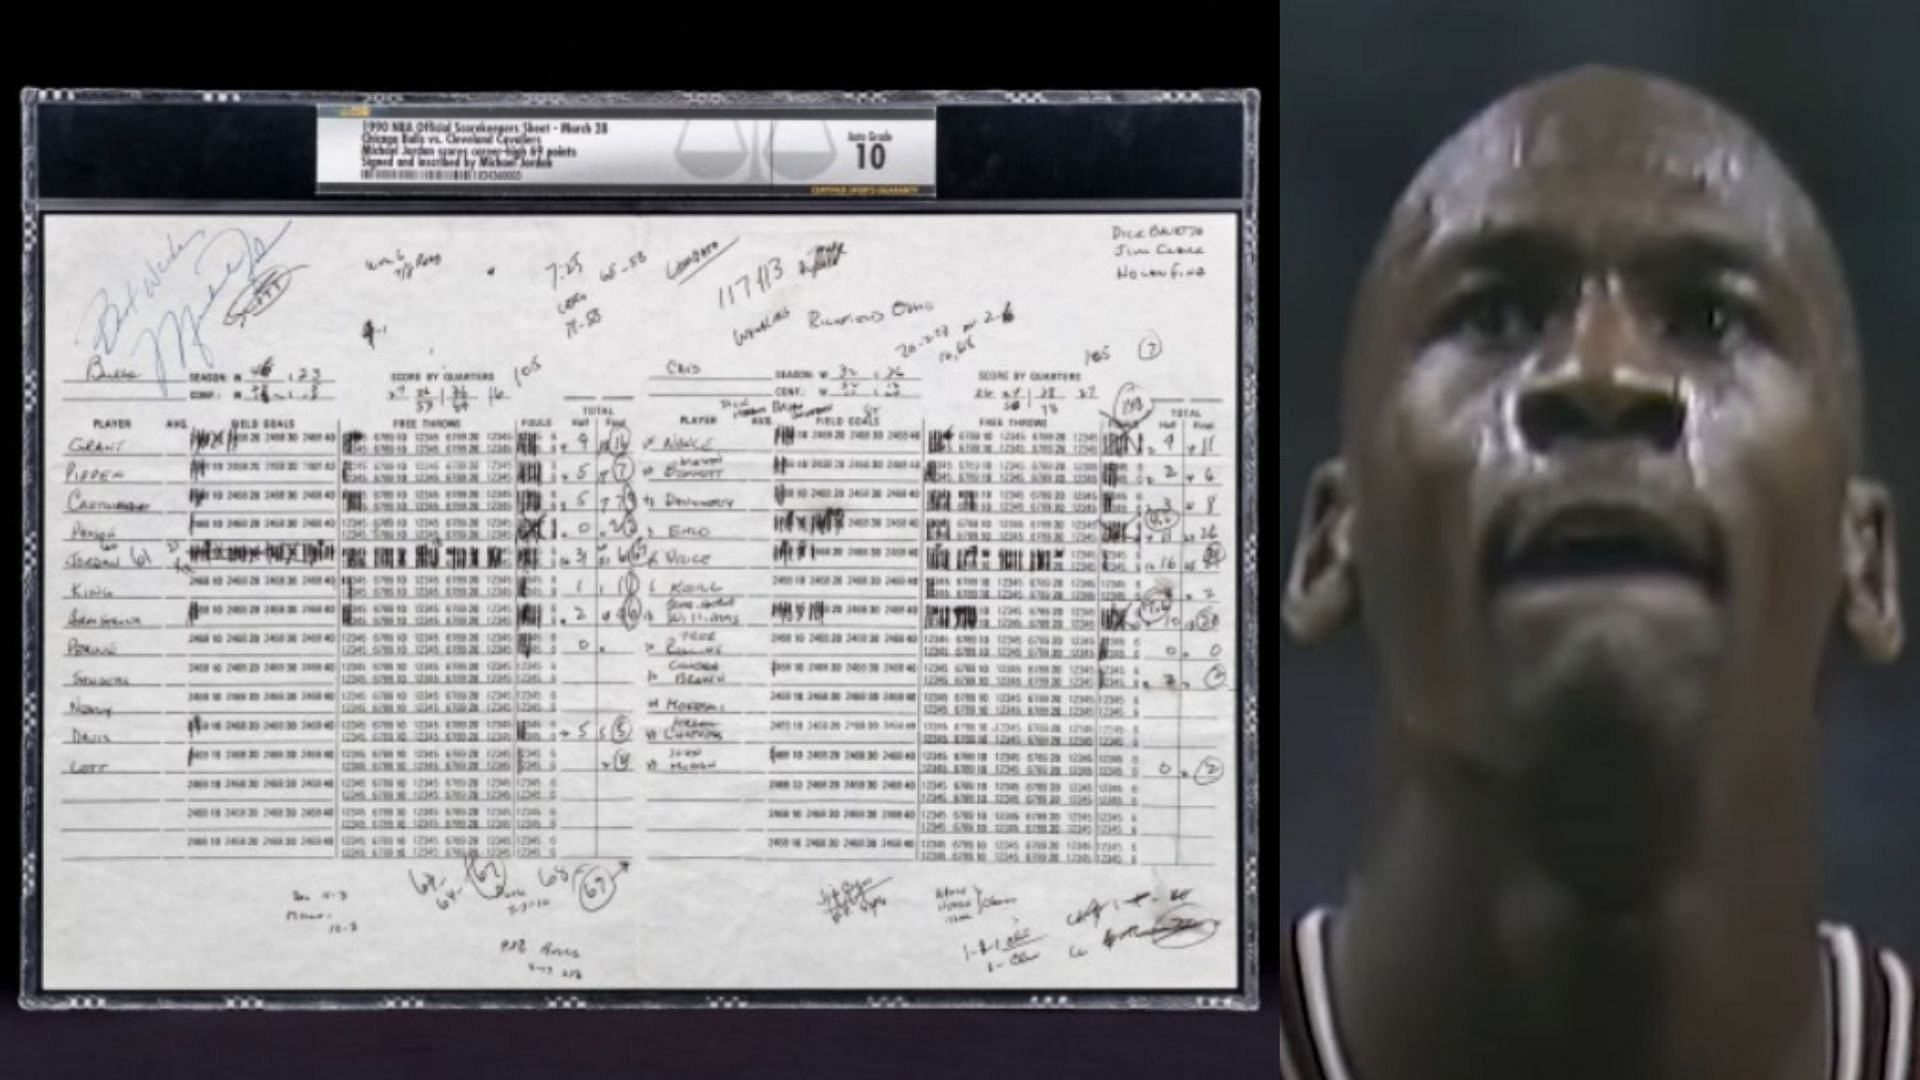 Michael Jordan’s 69-point game score sheet up for auction, MJ’s sneakers set record at .2 million